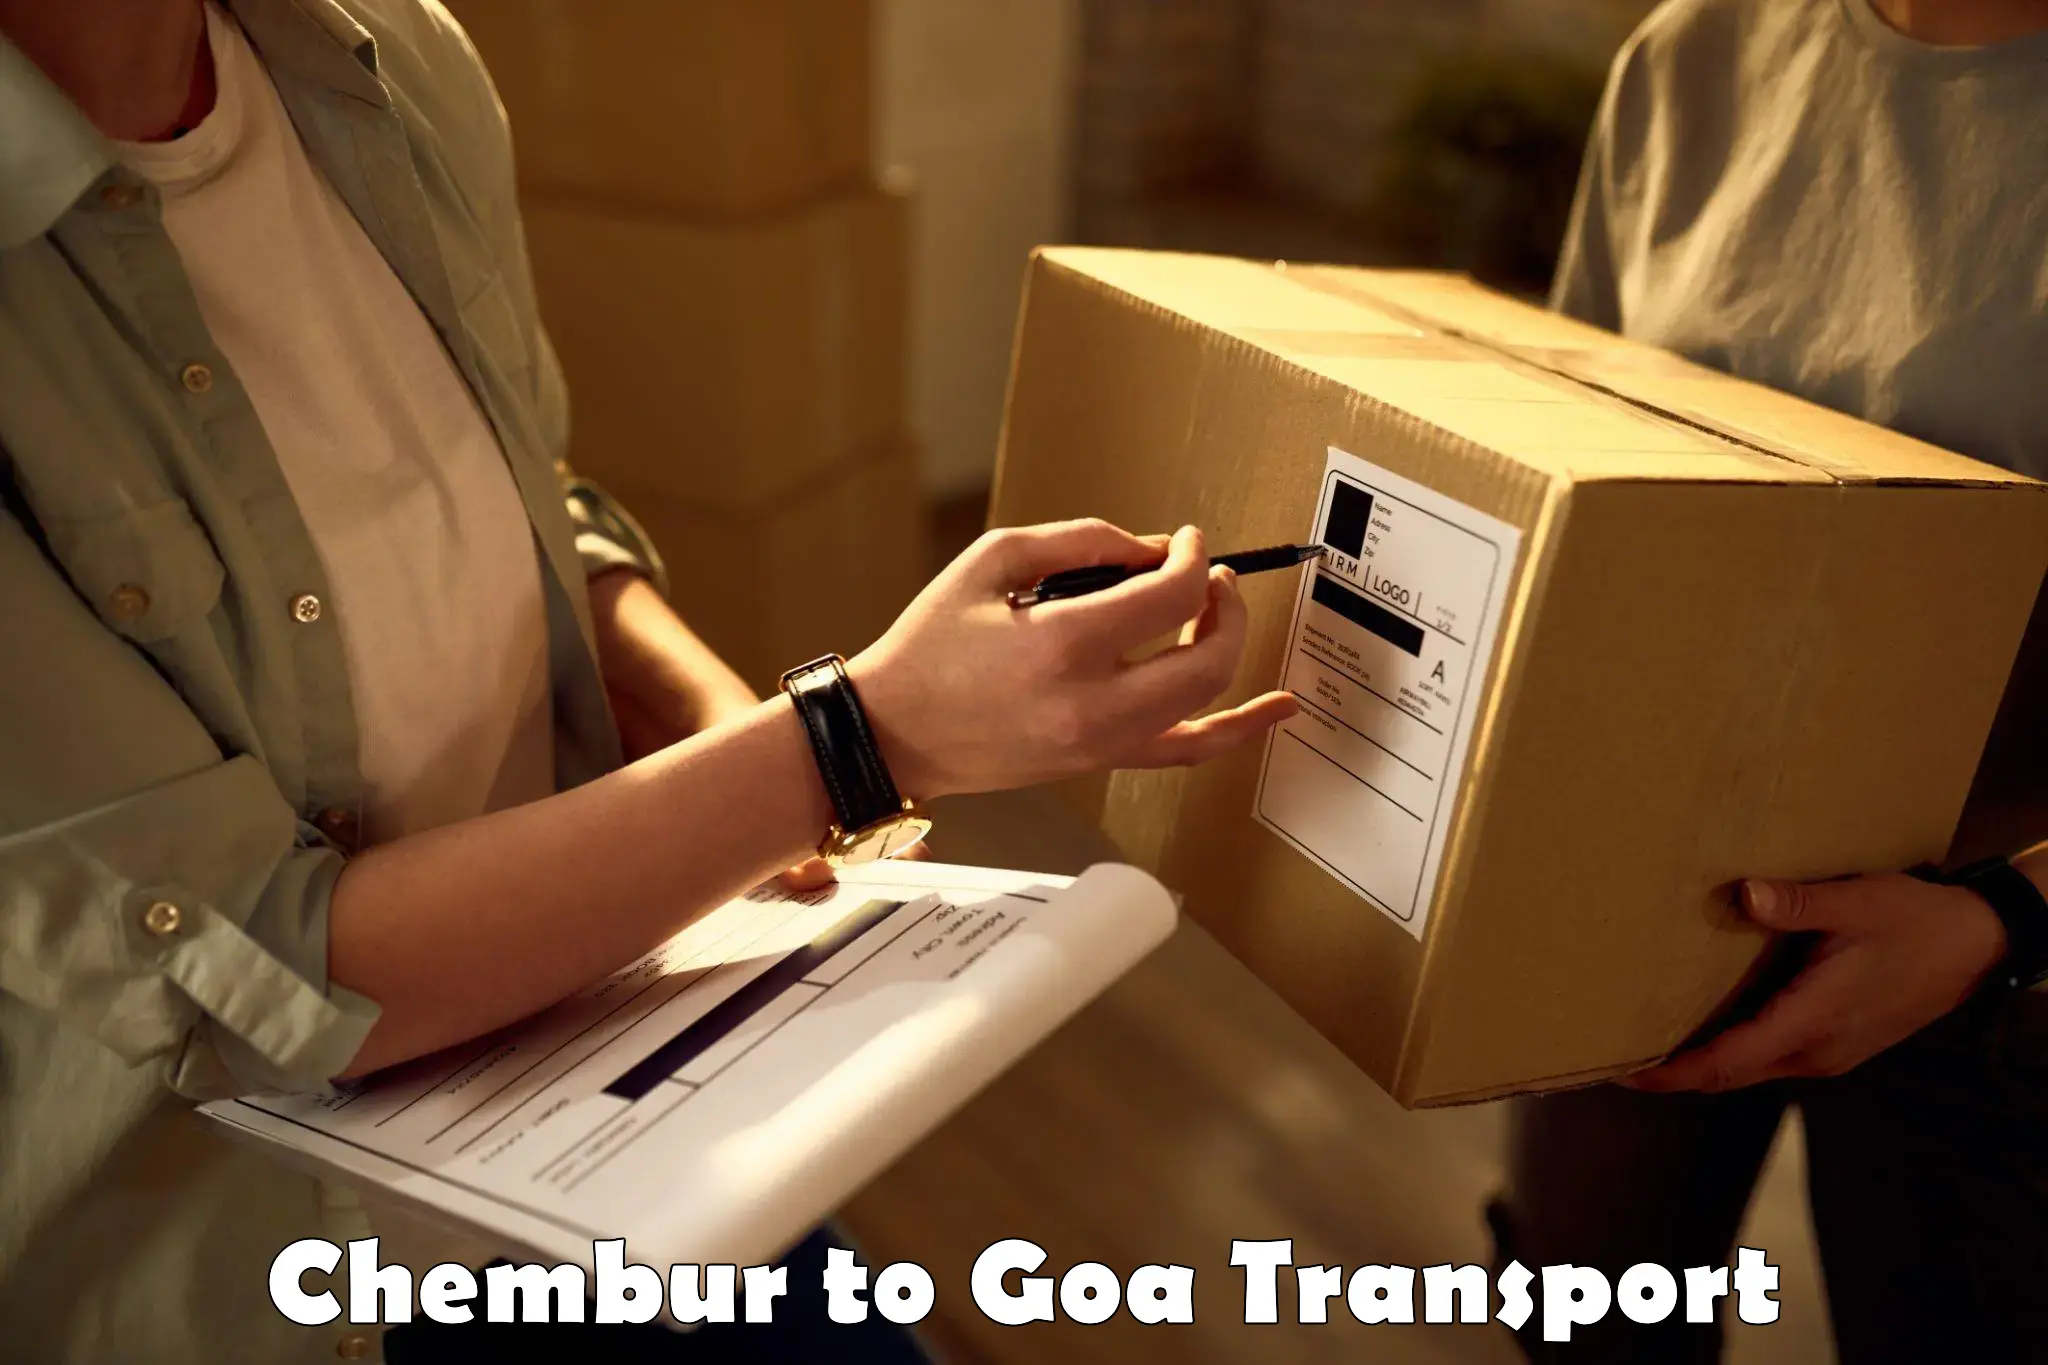 Delivery service Chembur to IIT Goa